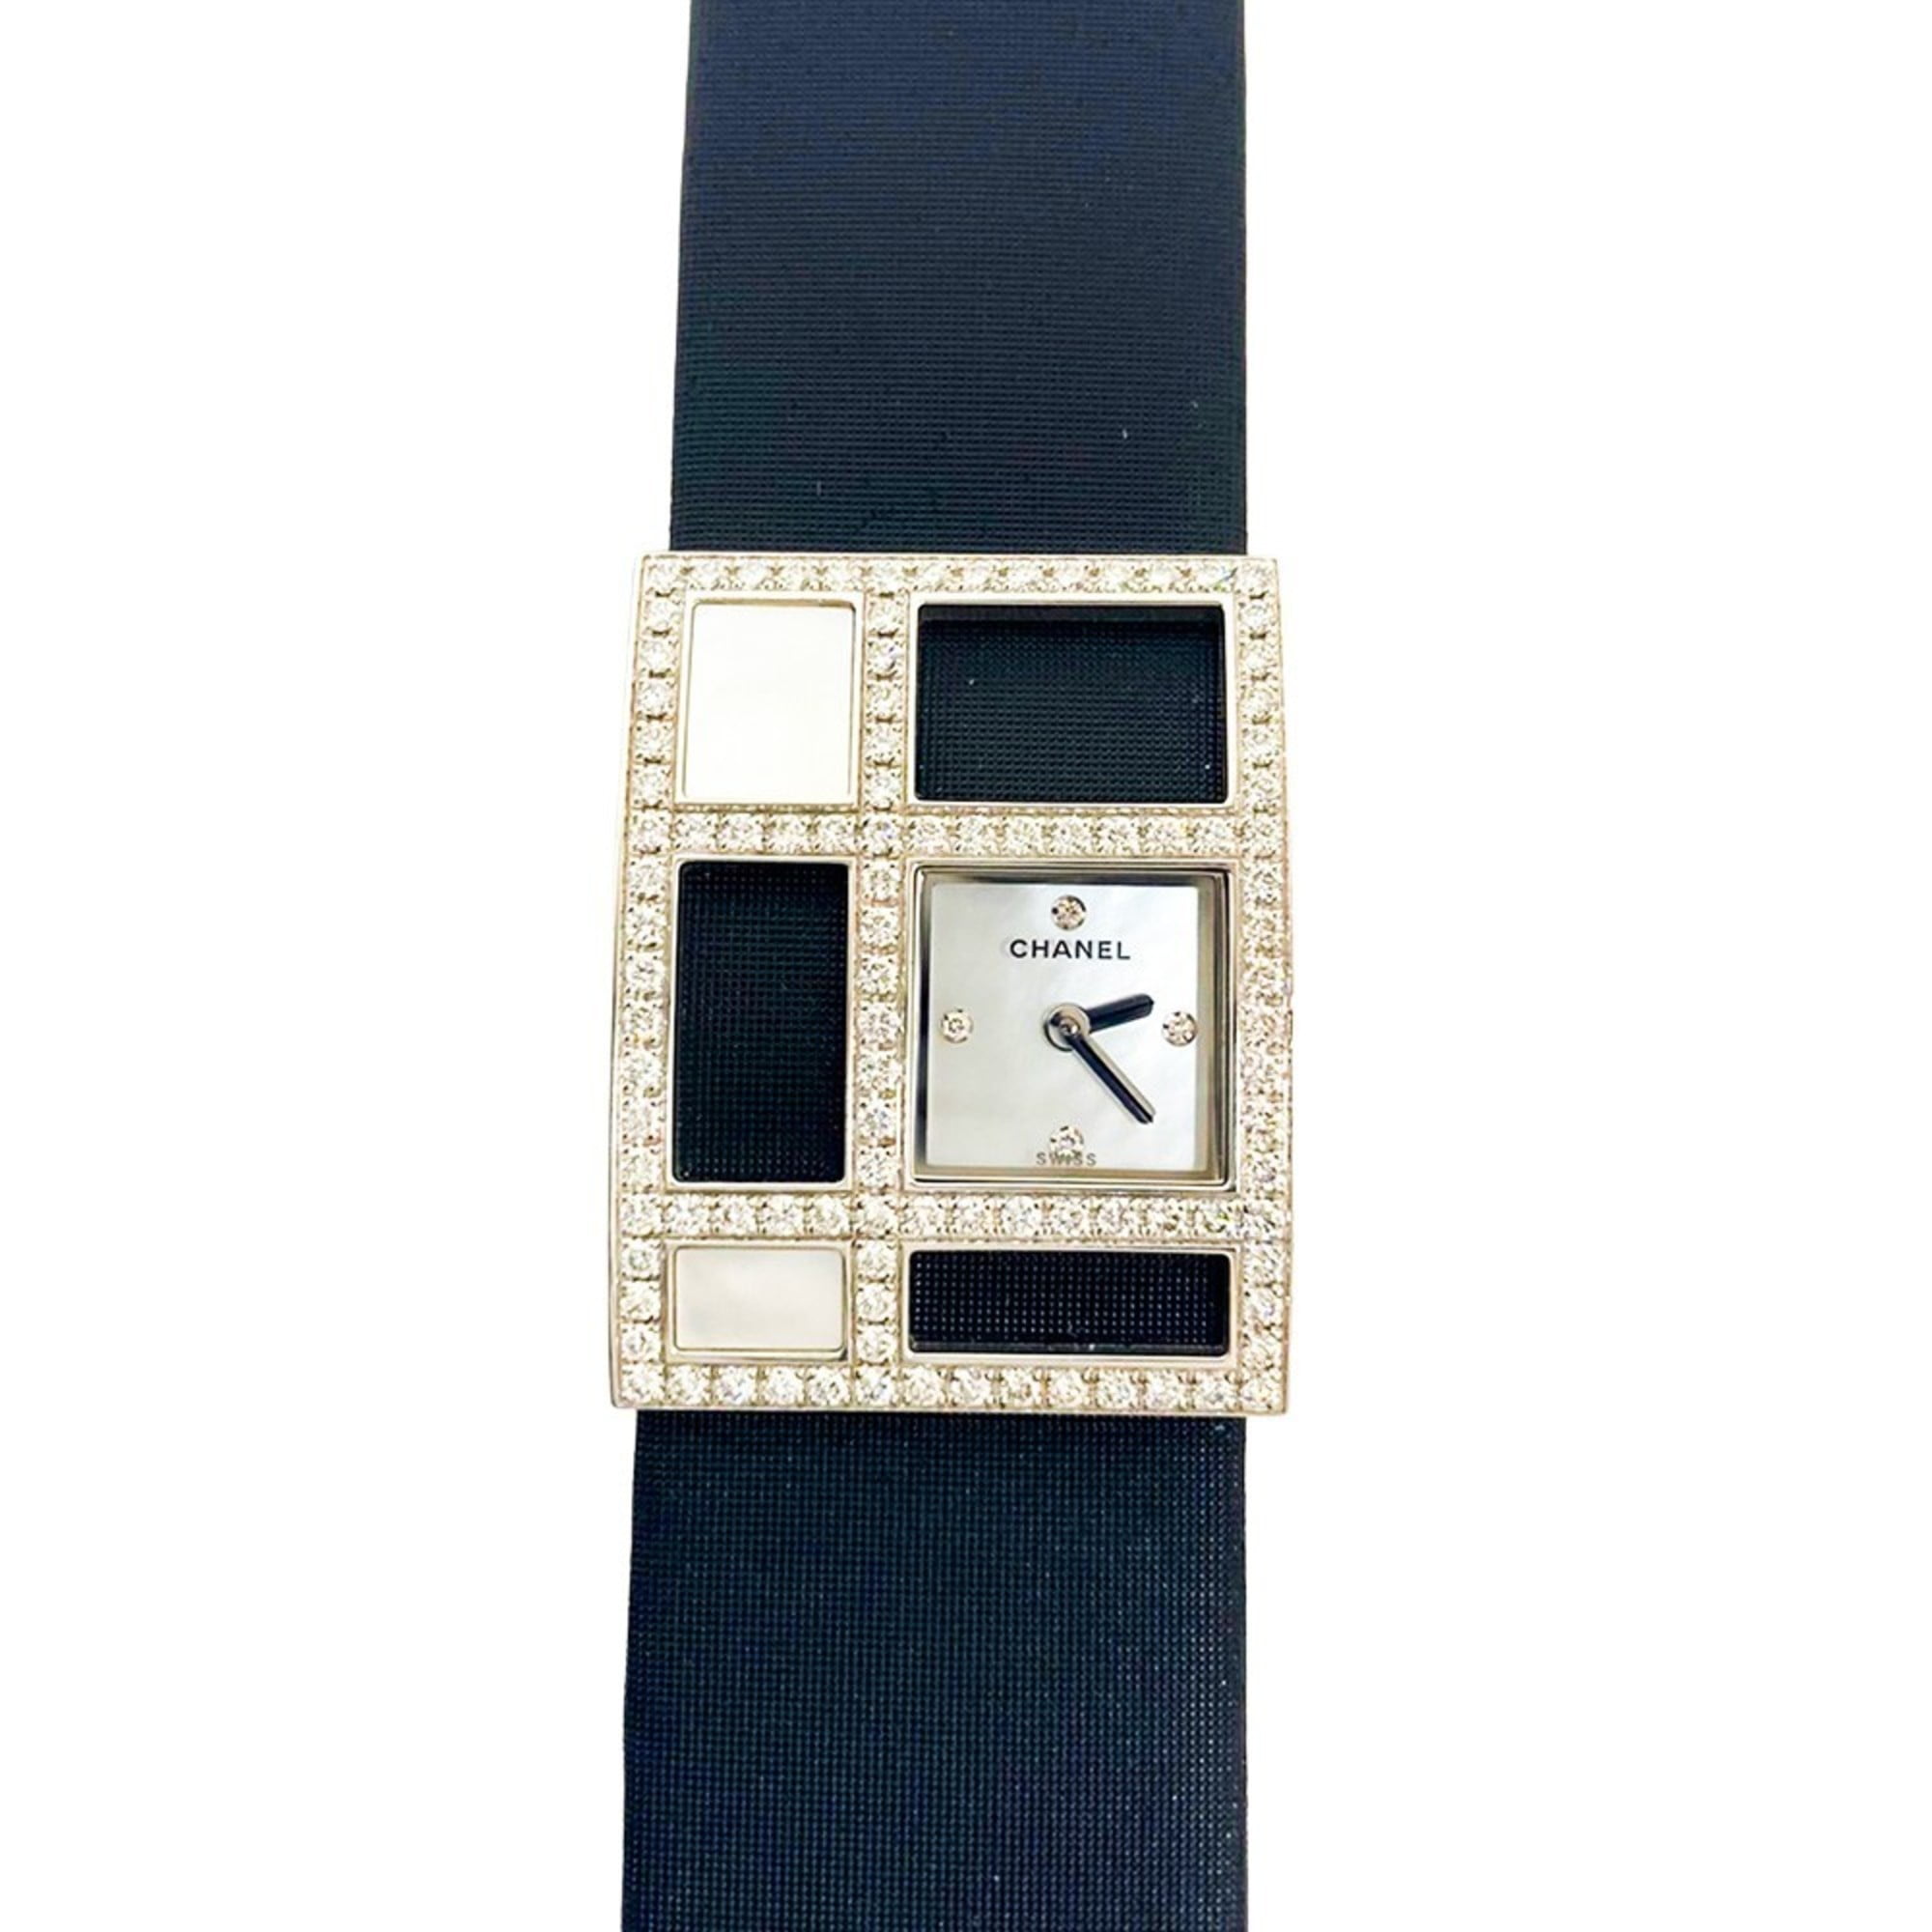 Authenticated Used CHANEL Chanel 1932 Art Deco Watch Clock K18 Diamond  Satin Belt Ladies White Black Shell H1185 Dress Dial Daily Life Waterproof  